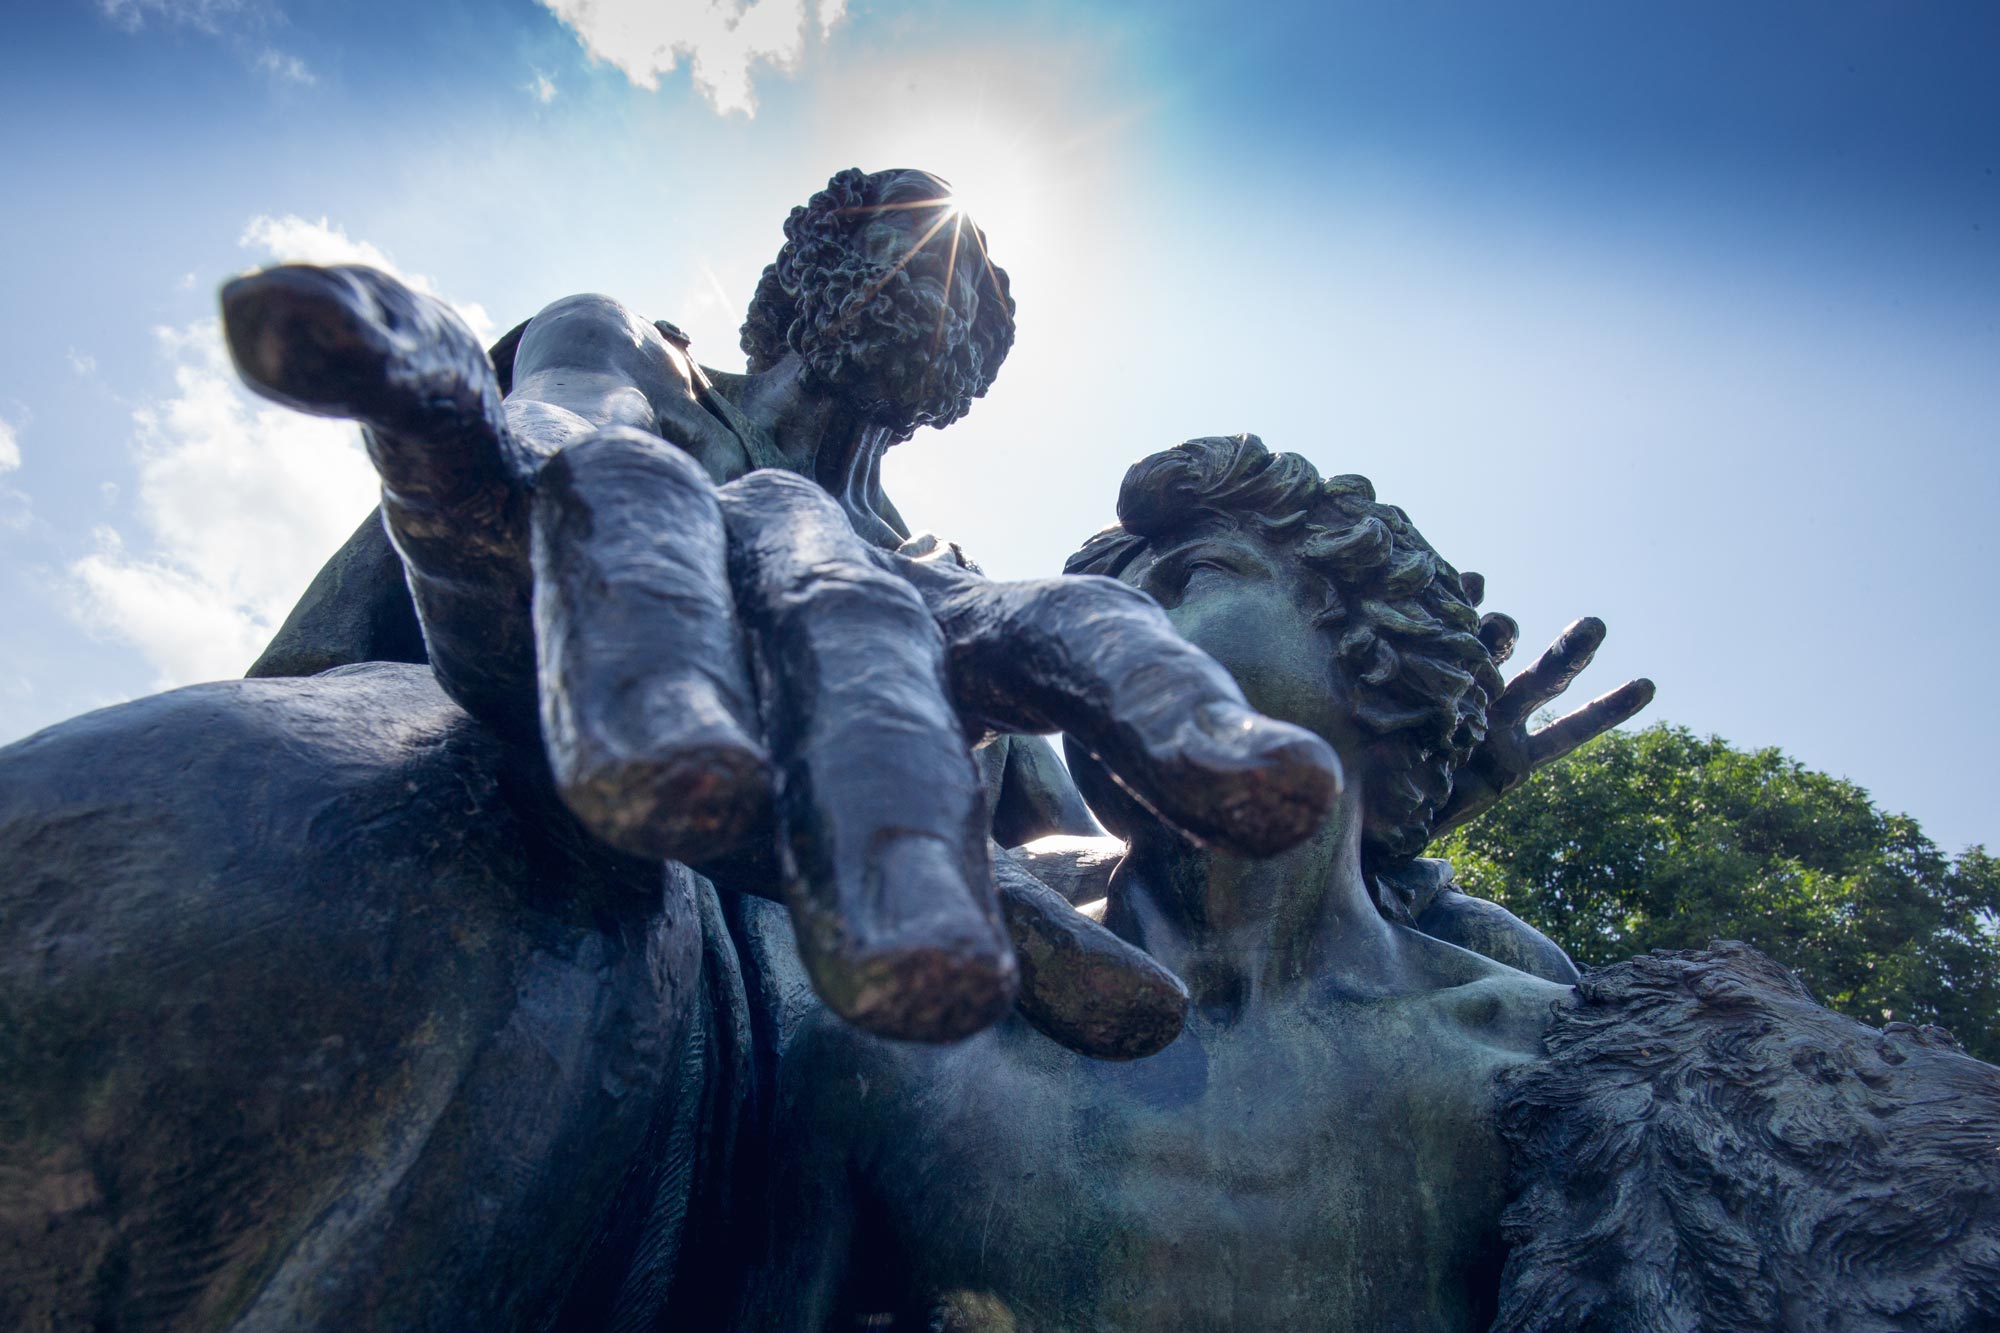 Up close view of homers hand on his statue on grounds